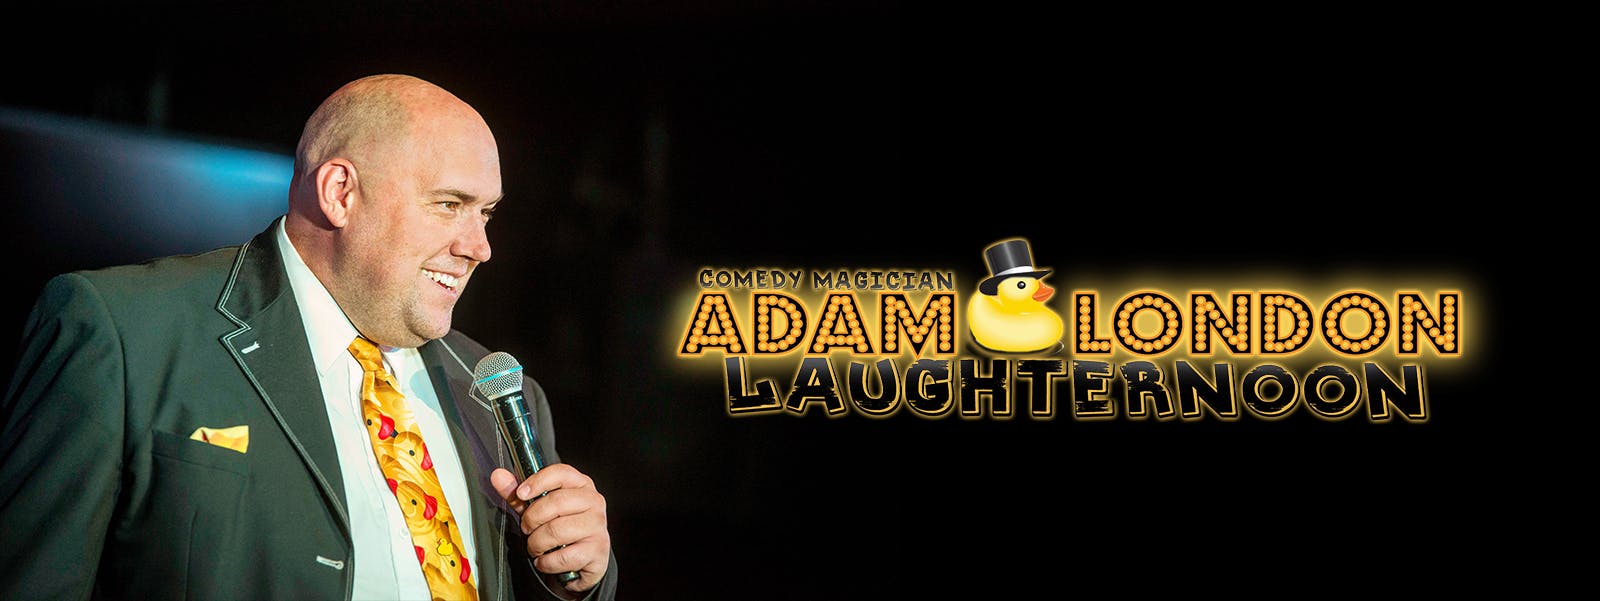 Tickets to Adam London's Laughternoon Musement